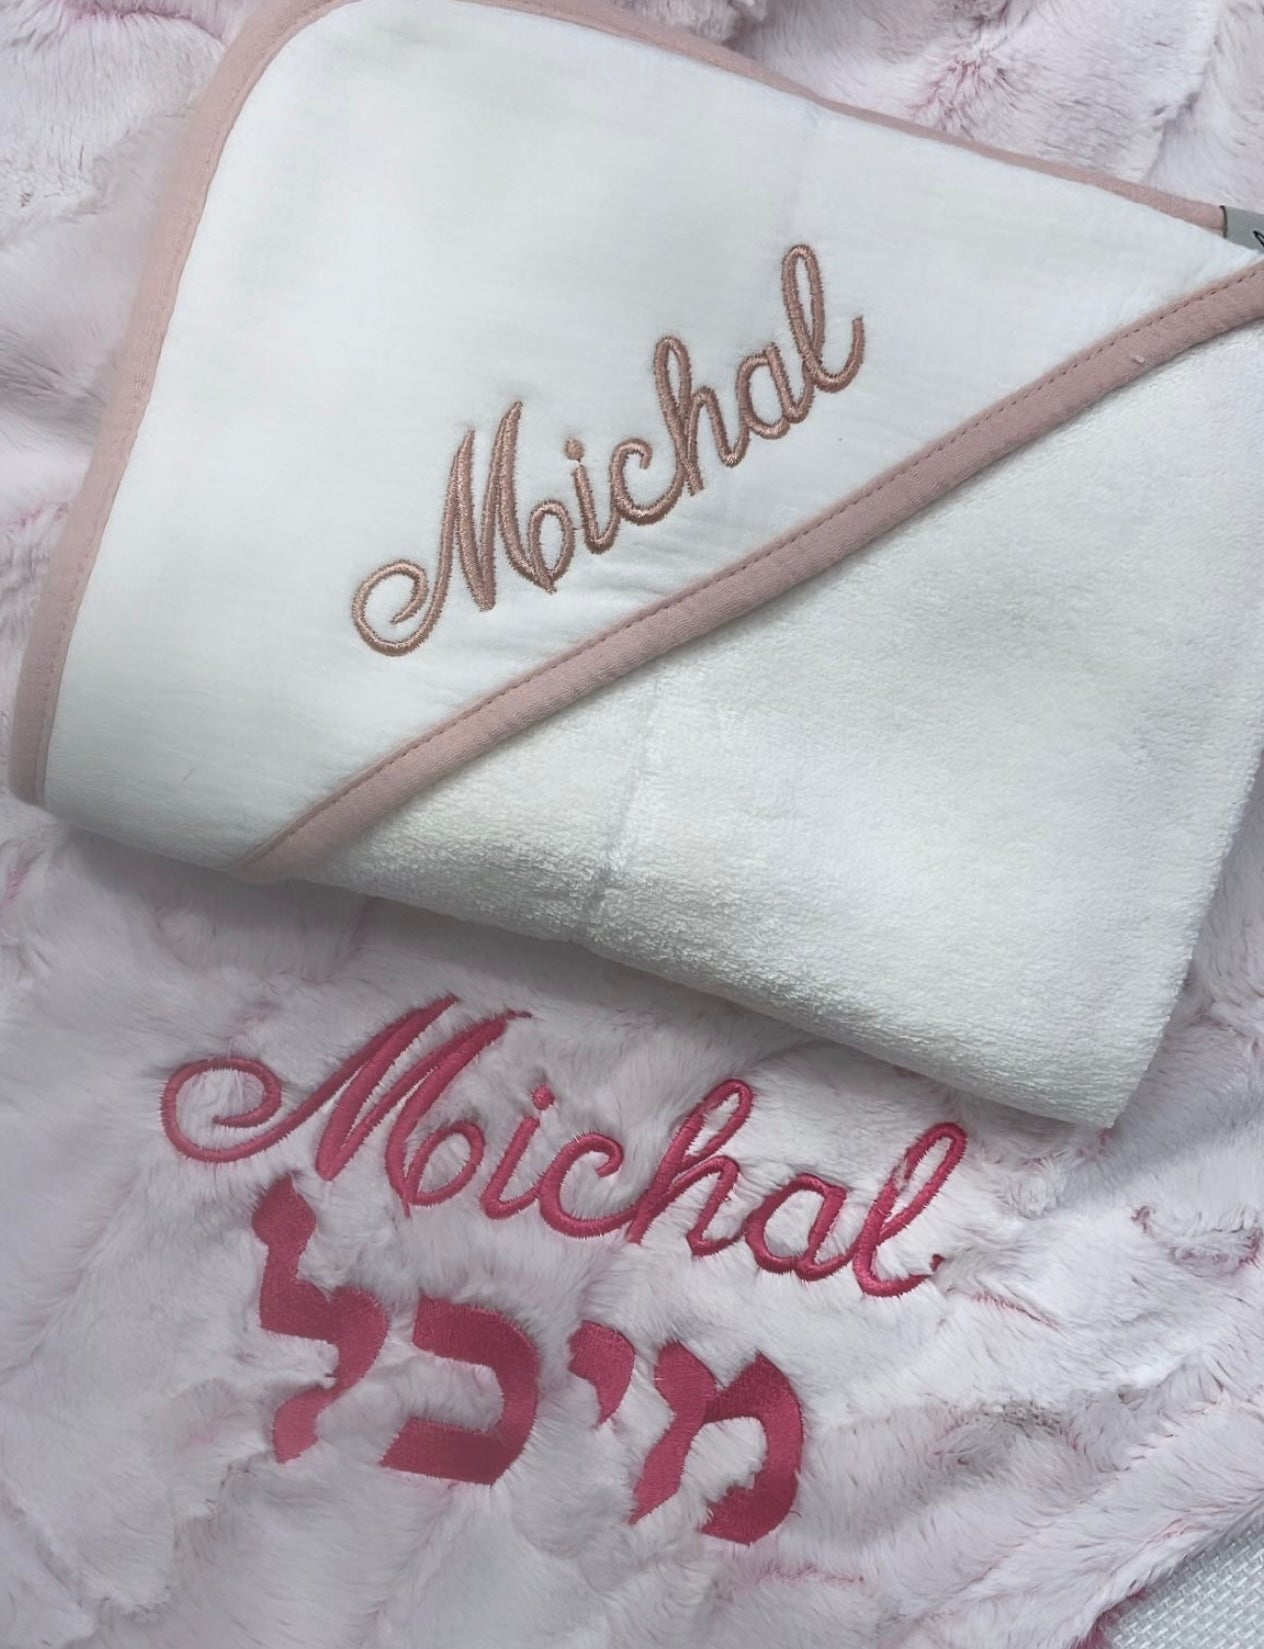 Pink Trim Towel (with embroidery)